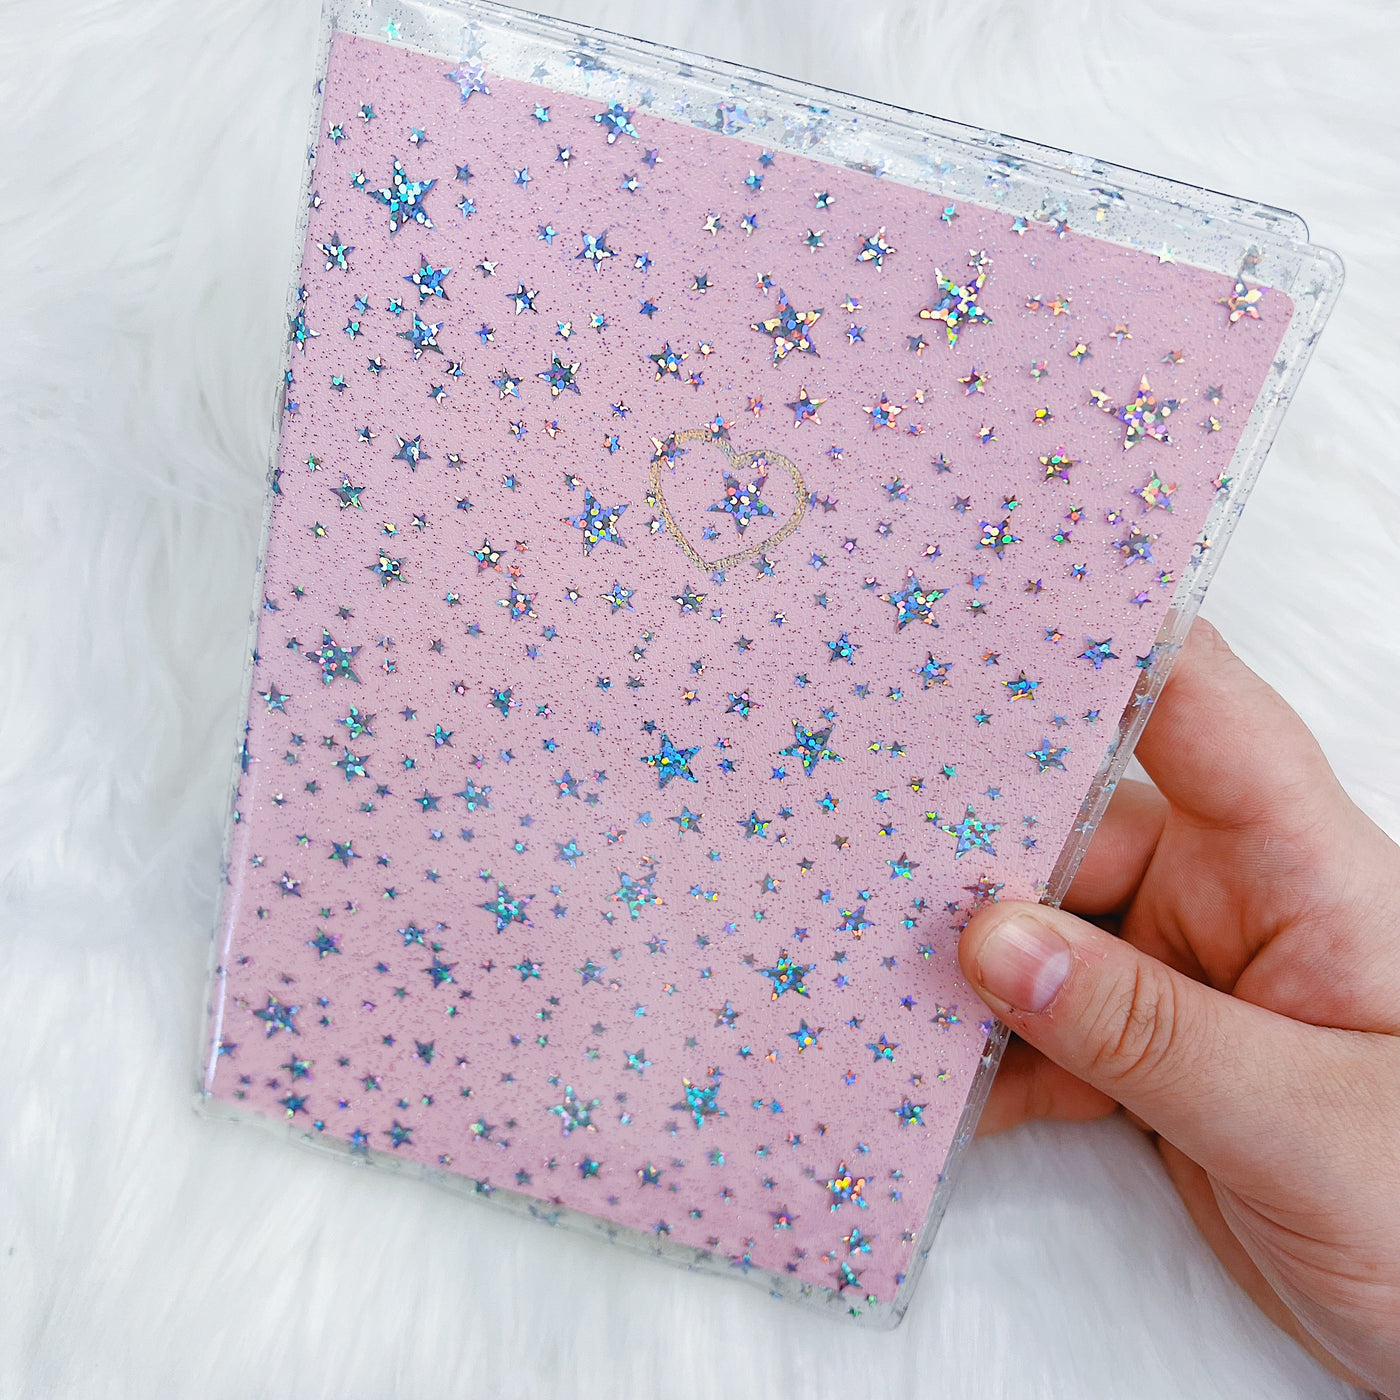 B6 Star Jelly Dashboard Sleeve | Fits our B6 Planners + Bullet Journals